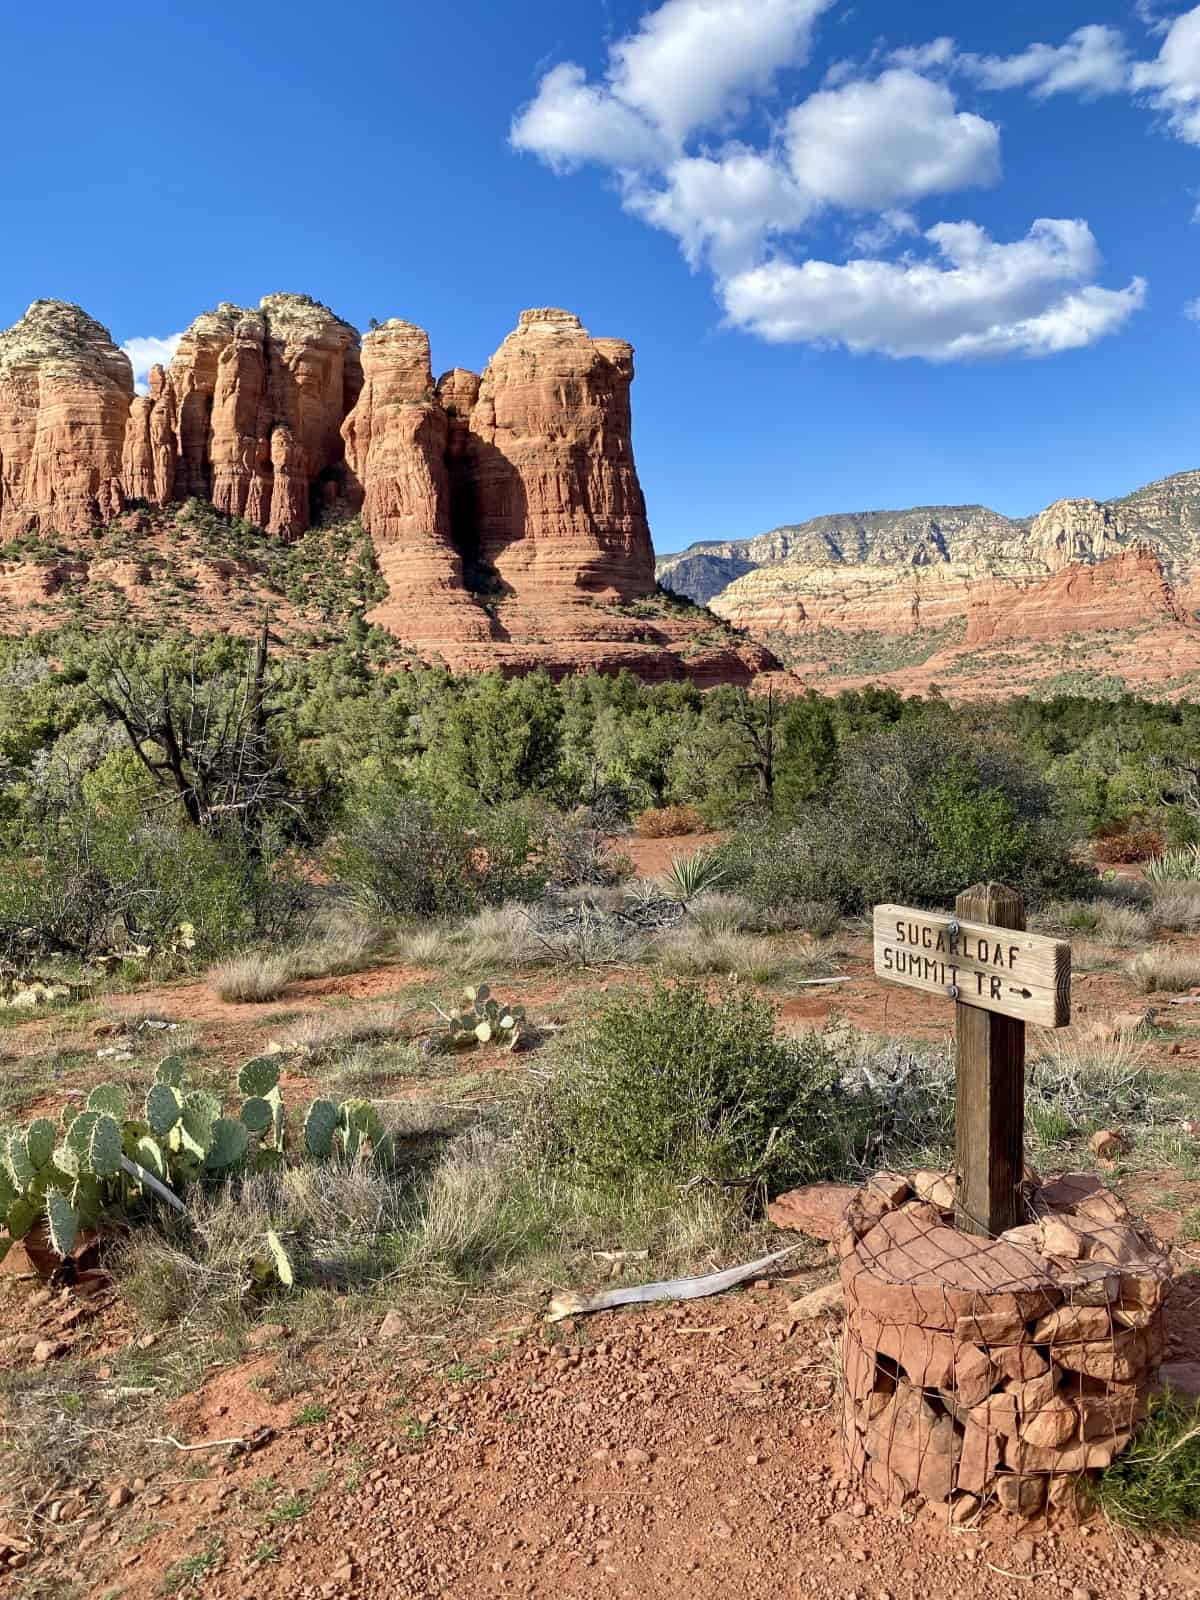 Sugarloaf Loop Trail...Maybe Sedona's Most Underrated Hike | If you're looking for a short, easy hike in Sedona with amazing views that's not too crowded, the Teacup Trail and Sugarloaf Loop and Summit are perfect for you! Sedona trail ideas, best Sedona hikes, easy Sedona hikes, Sedona sunrise hike. #sugarloafloop #sedona #arizonahikes #girlstrip